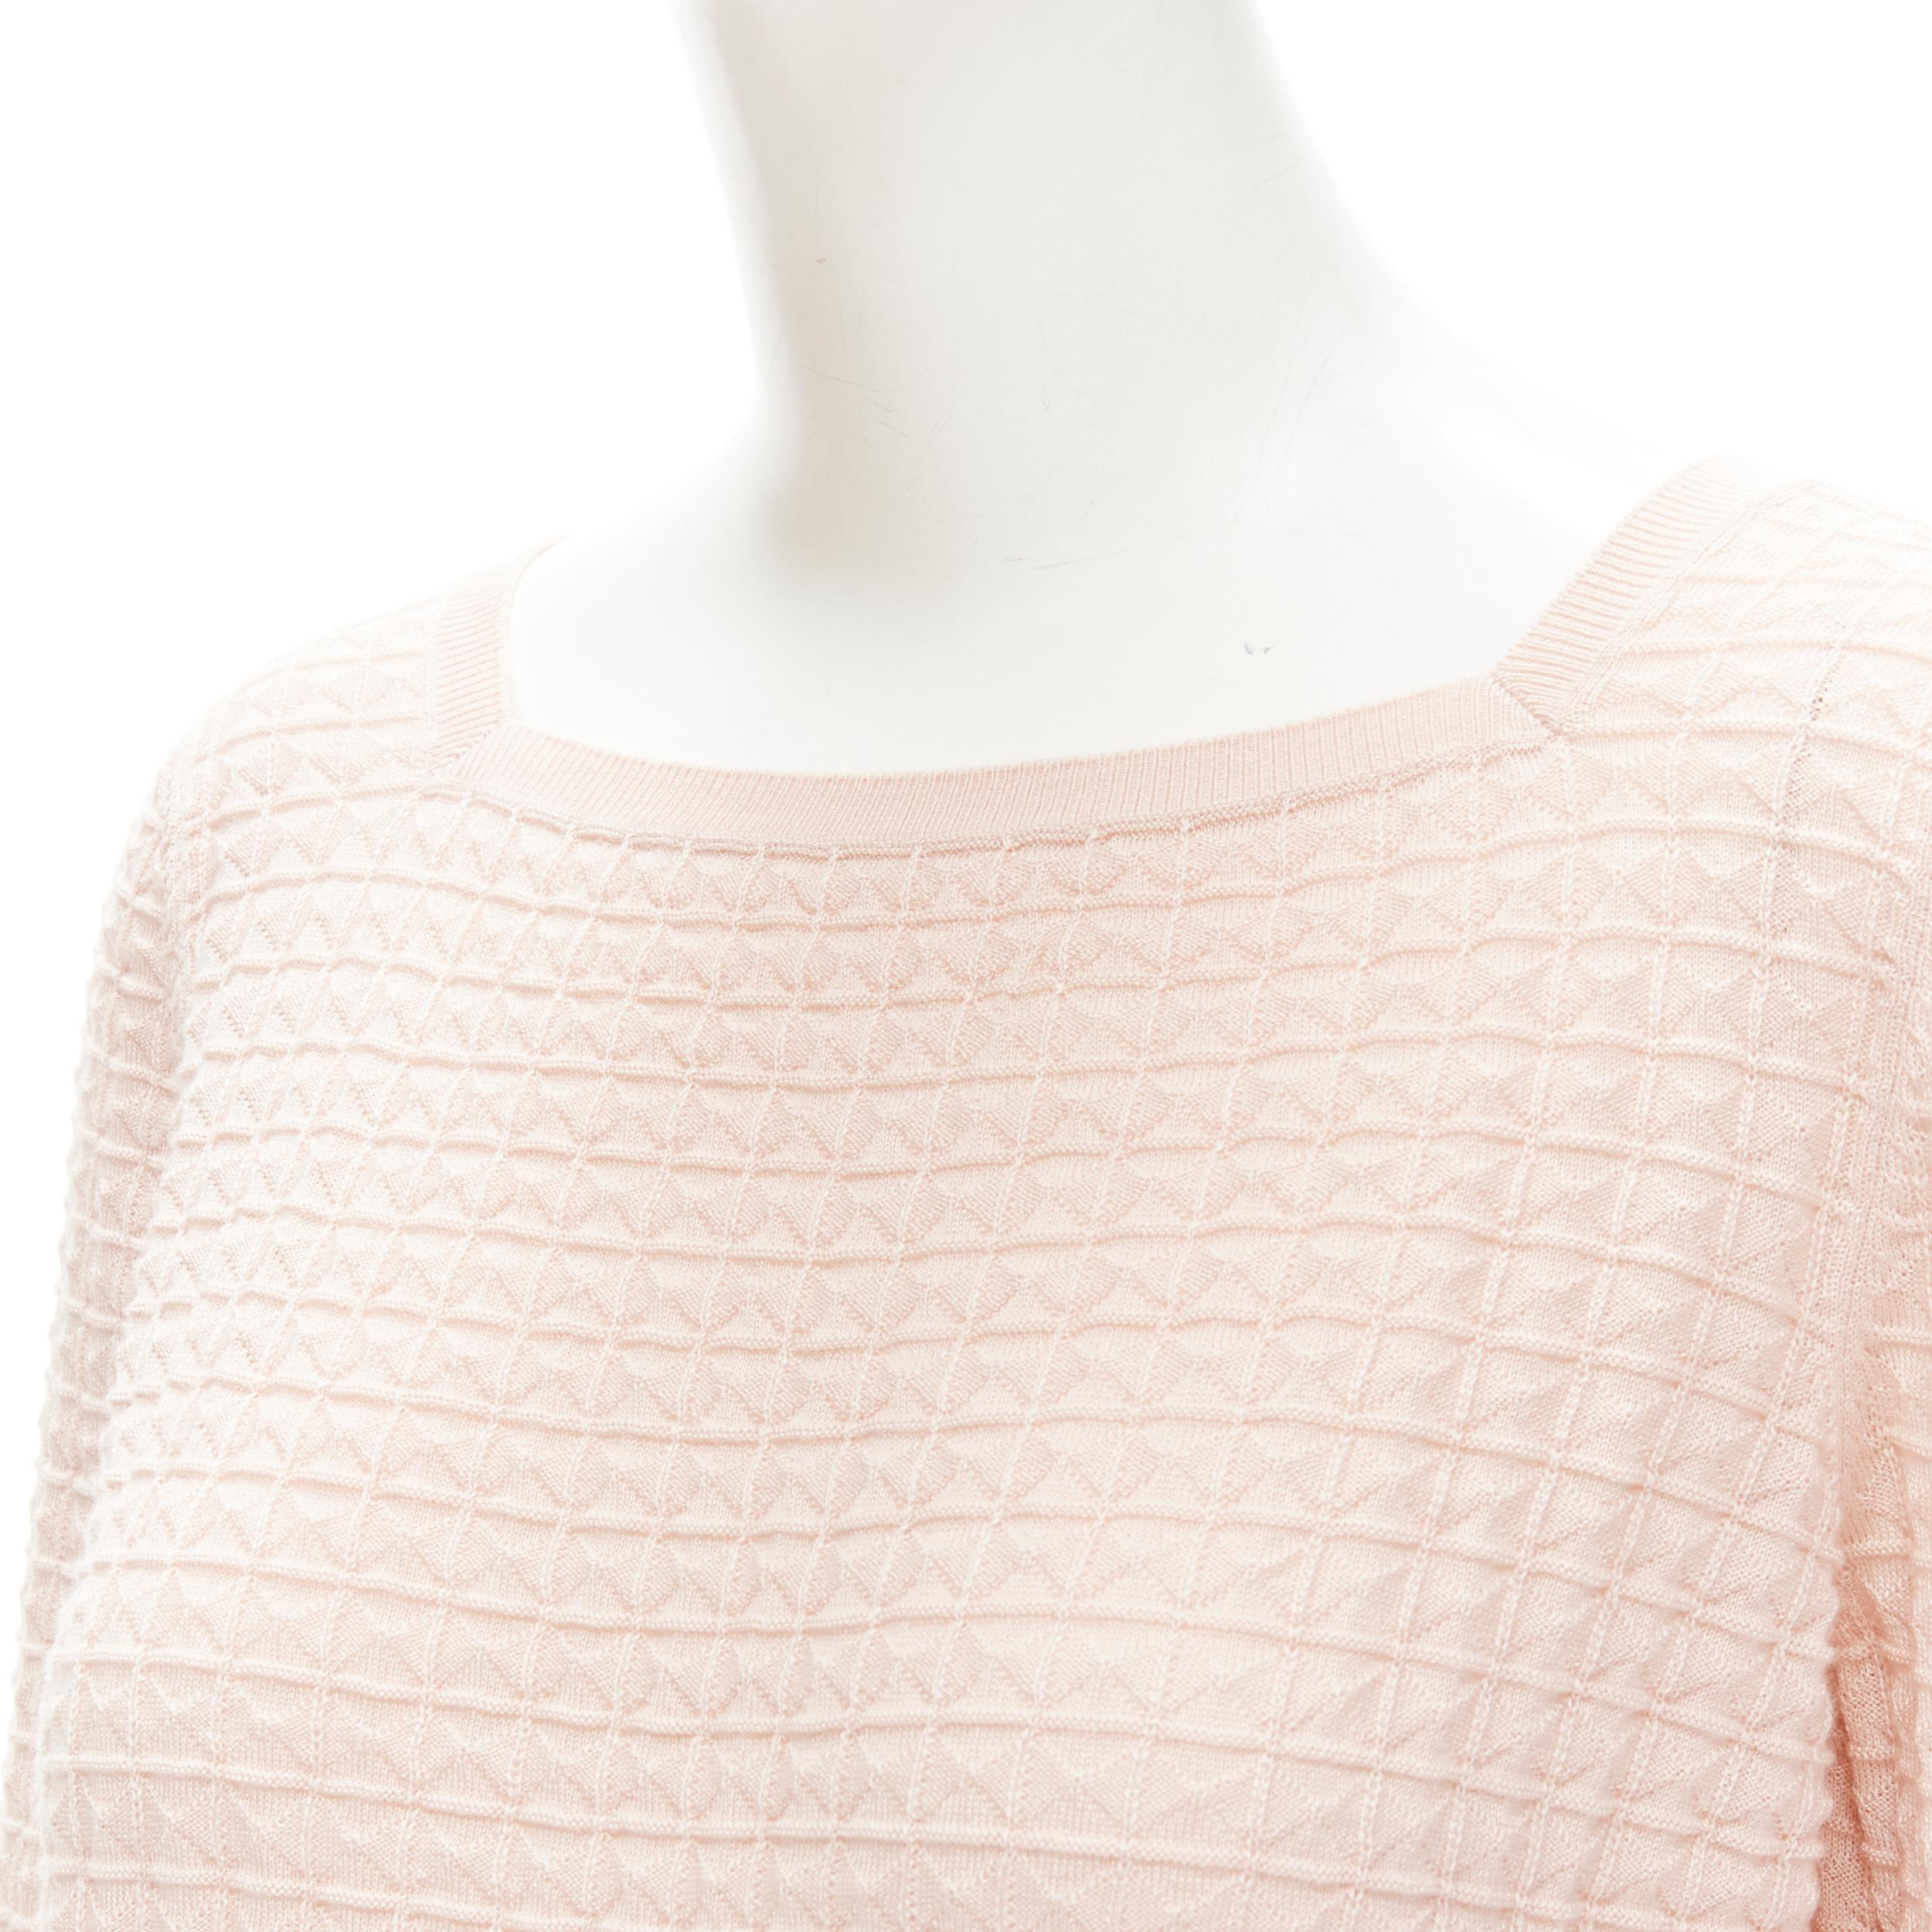 HERMES cashmere silk light pink geometric knit square neck sweater FR38 S
Brand: Hermes
Material: Cashmere
Color: Pink
Pattern: Solid
Extra Detail: Textured 3D knit. Square neckline
Made in: Italy

CONDITION:
Condition: Excellent, this item was